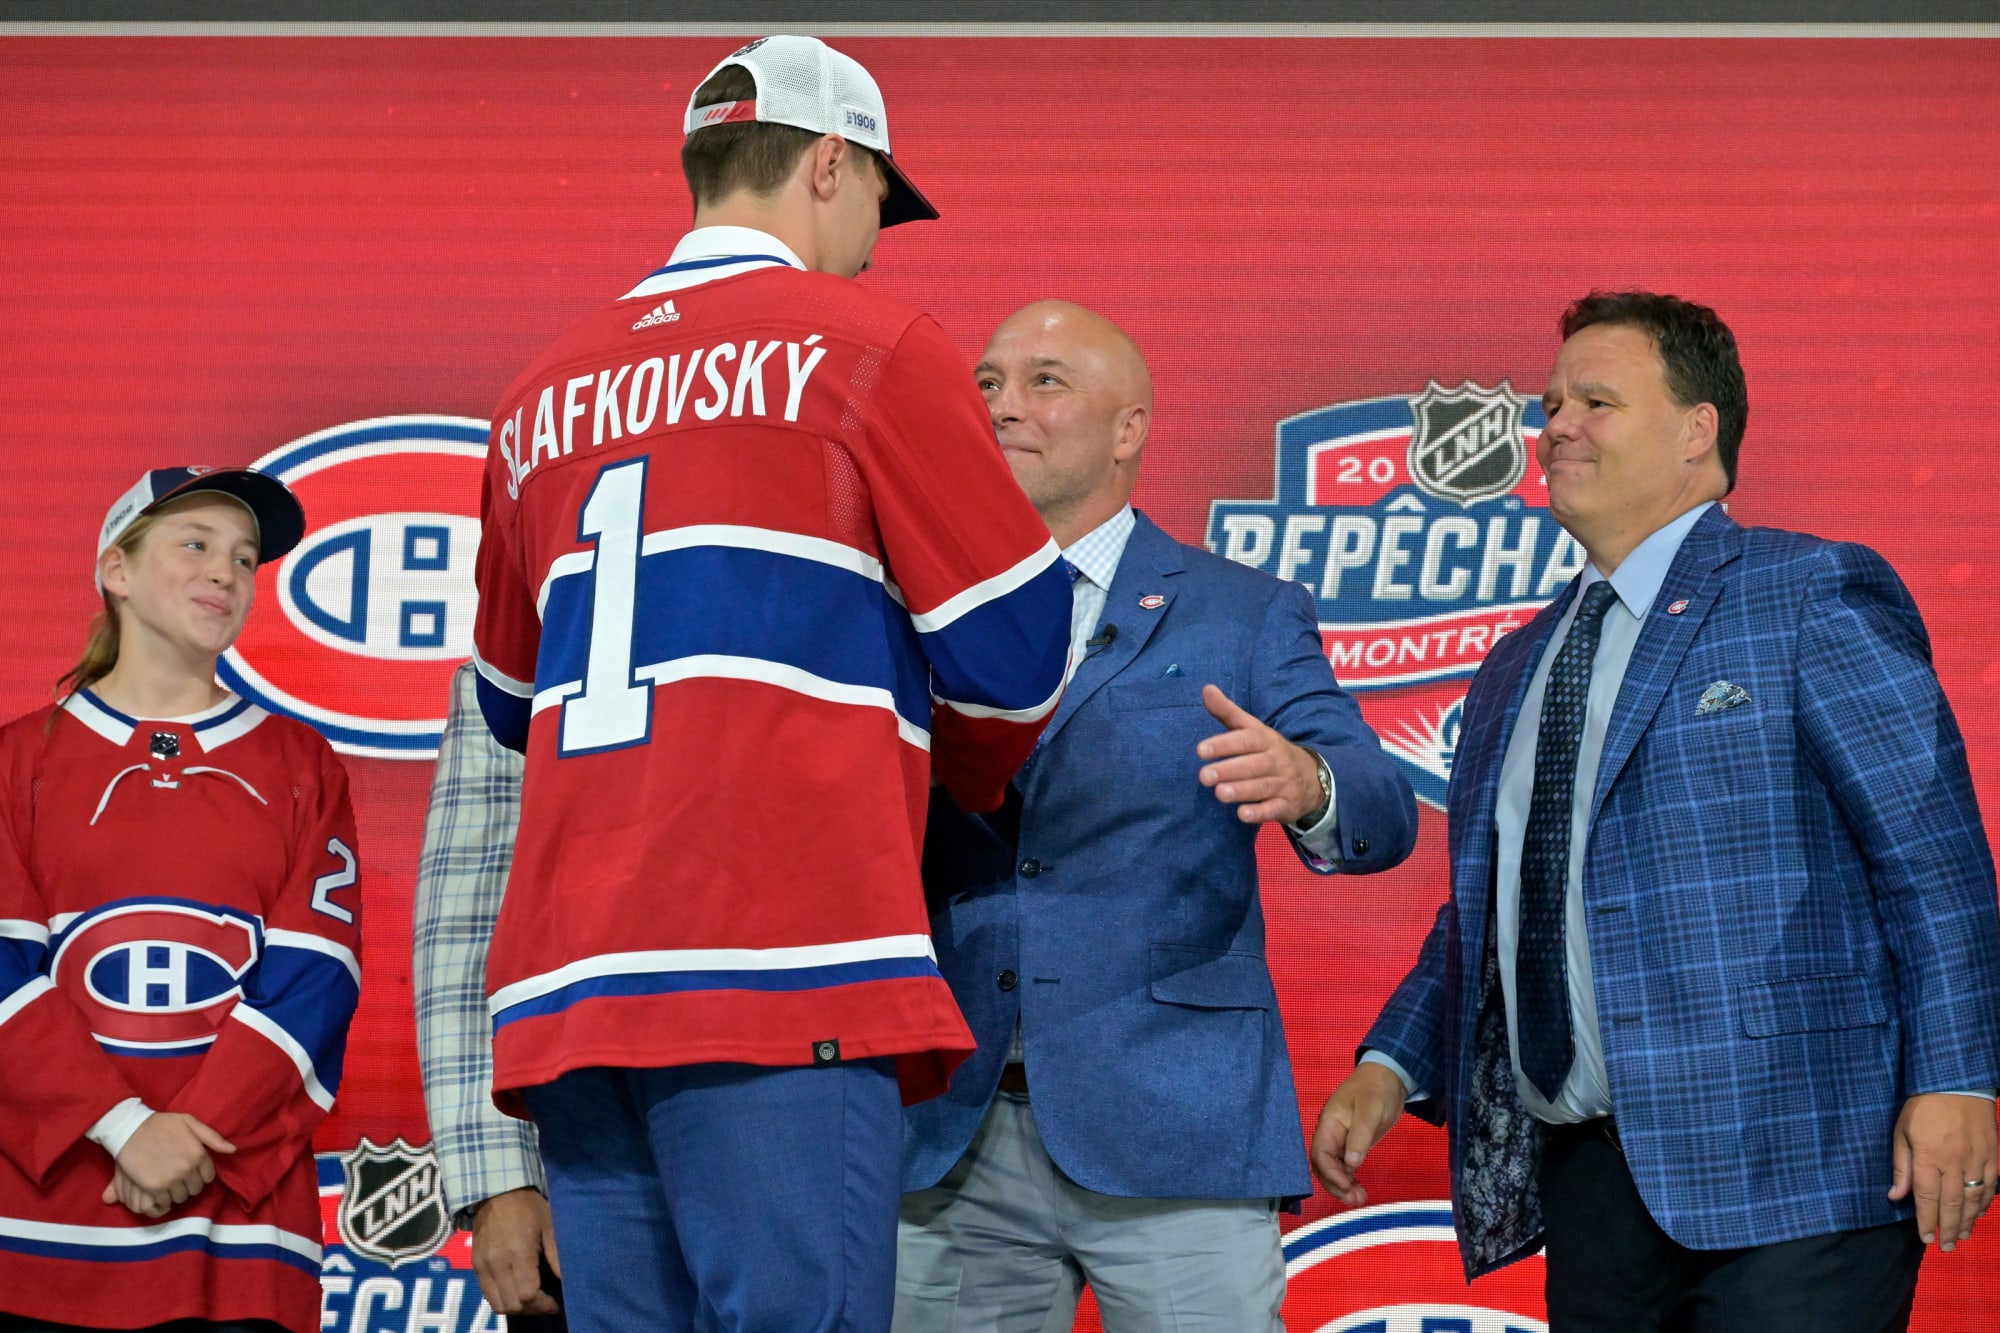 Canadiens Announce New Jersey Numbers For Next Season